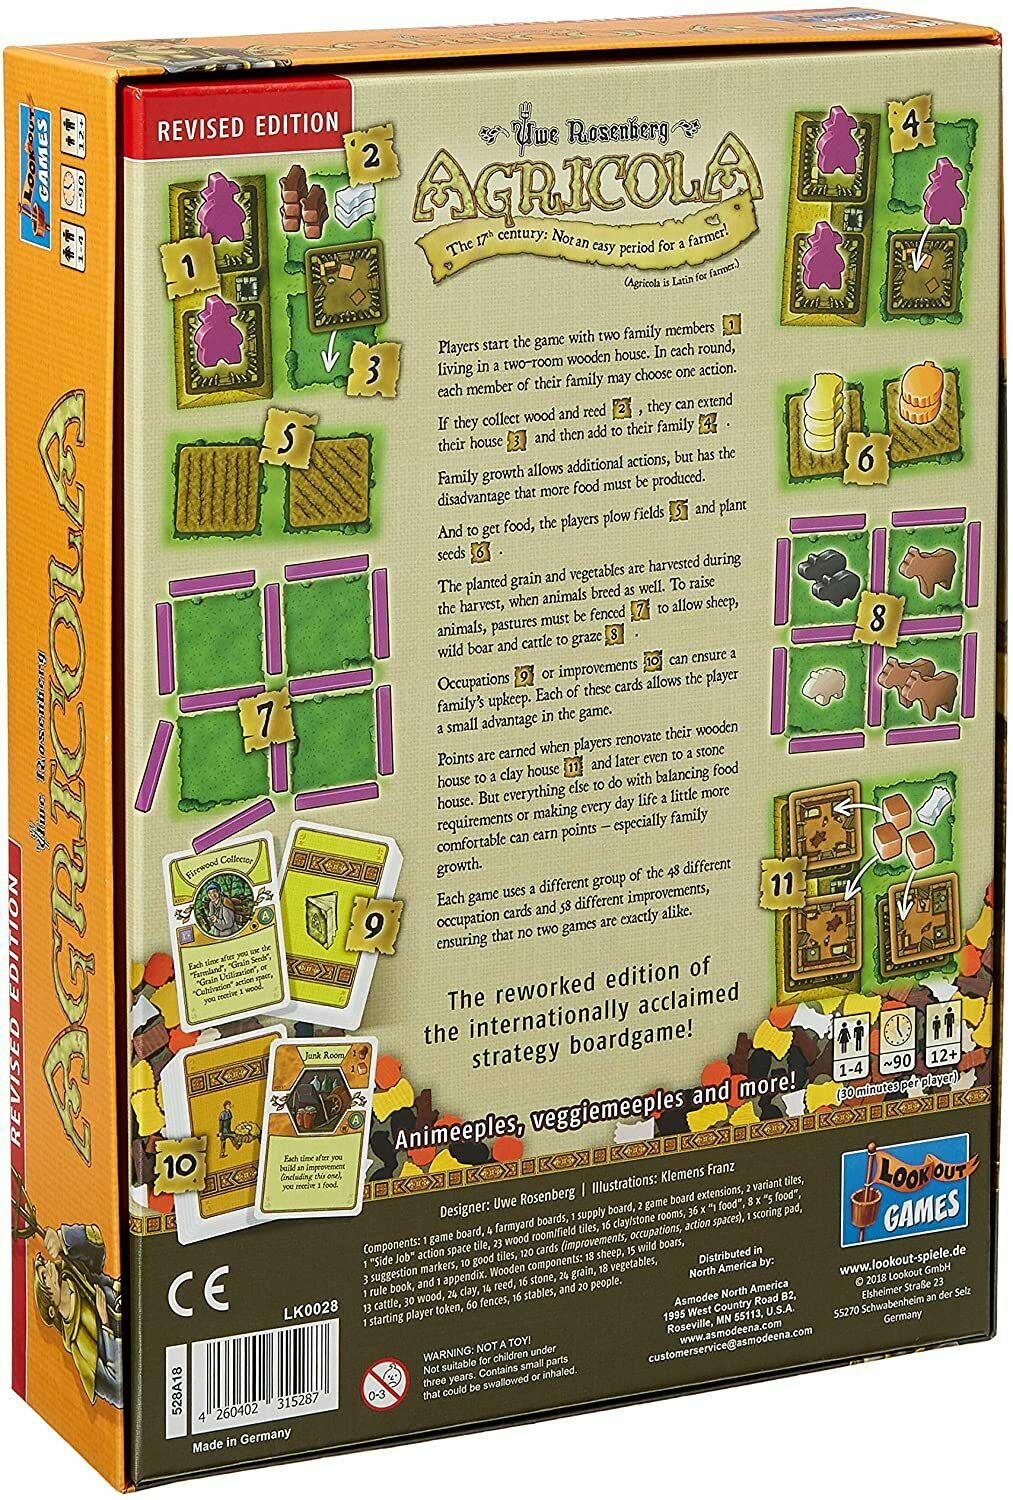 Agricola Board Game Revised Edition.